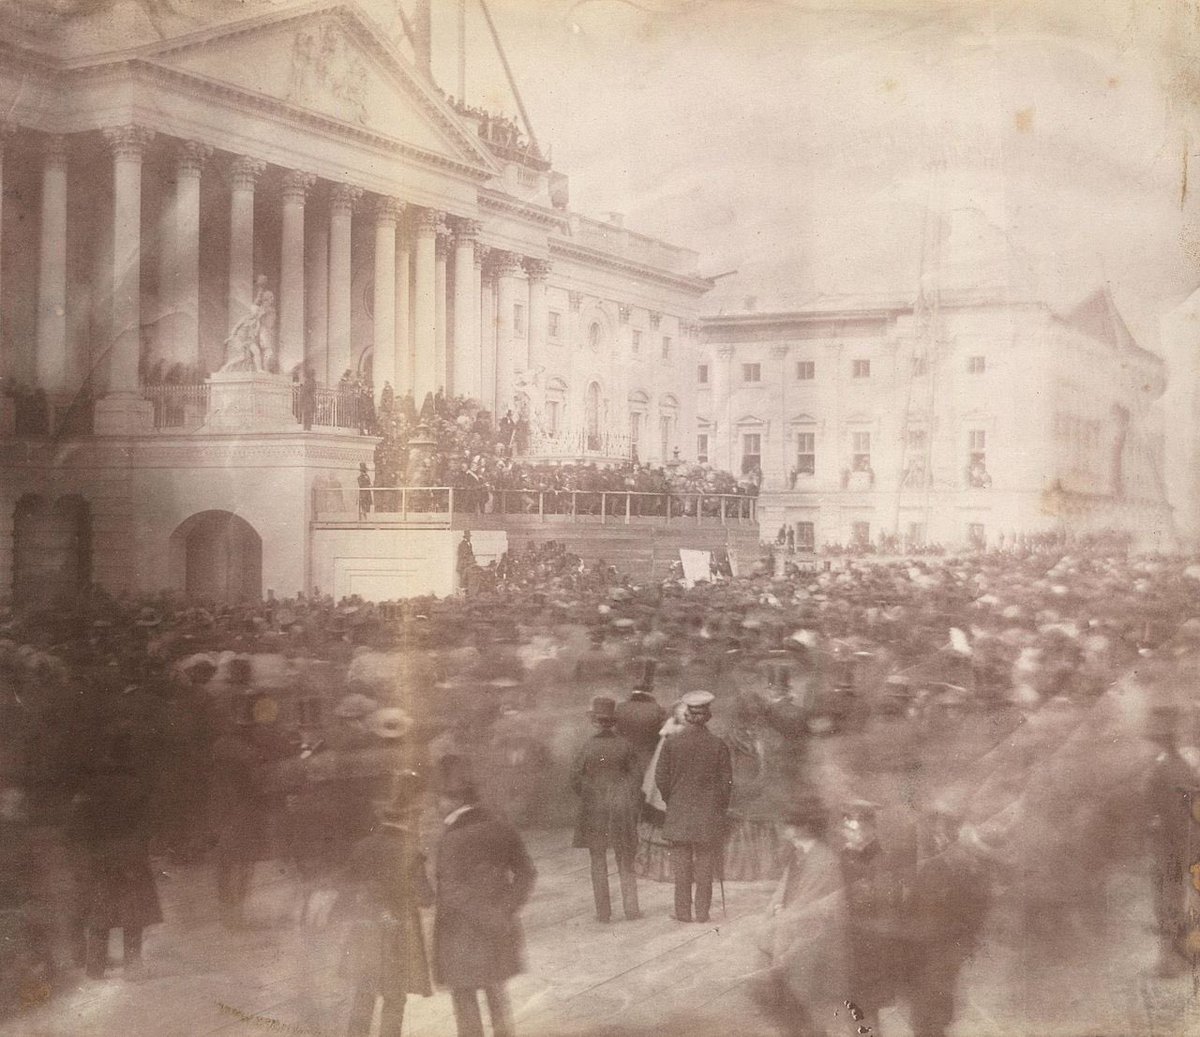 15. James Buchanan’s inauguration in 1857 was the first inauguration ceremony known to be photographed. #PresidentsDay